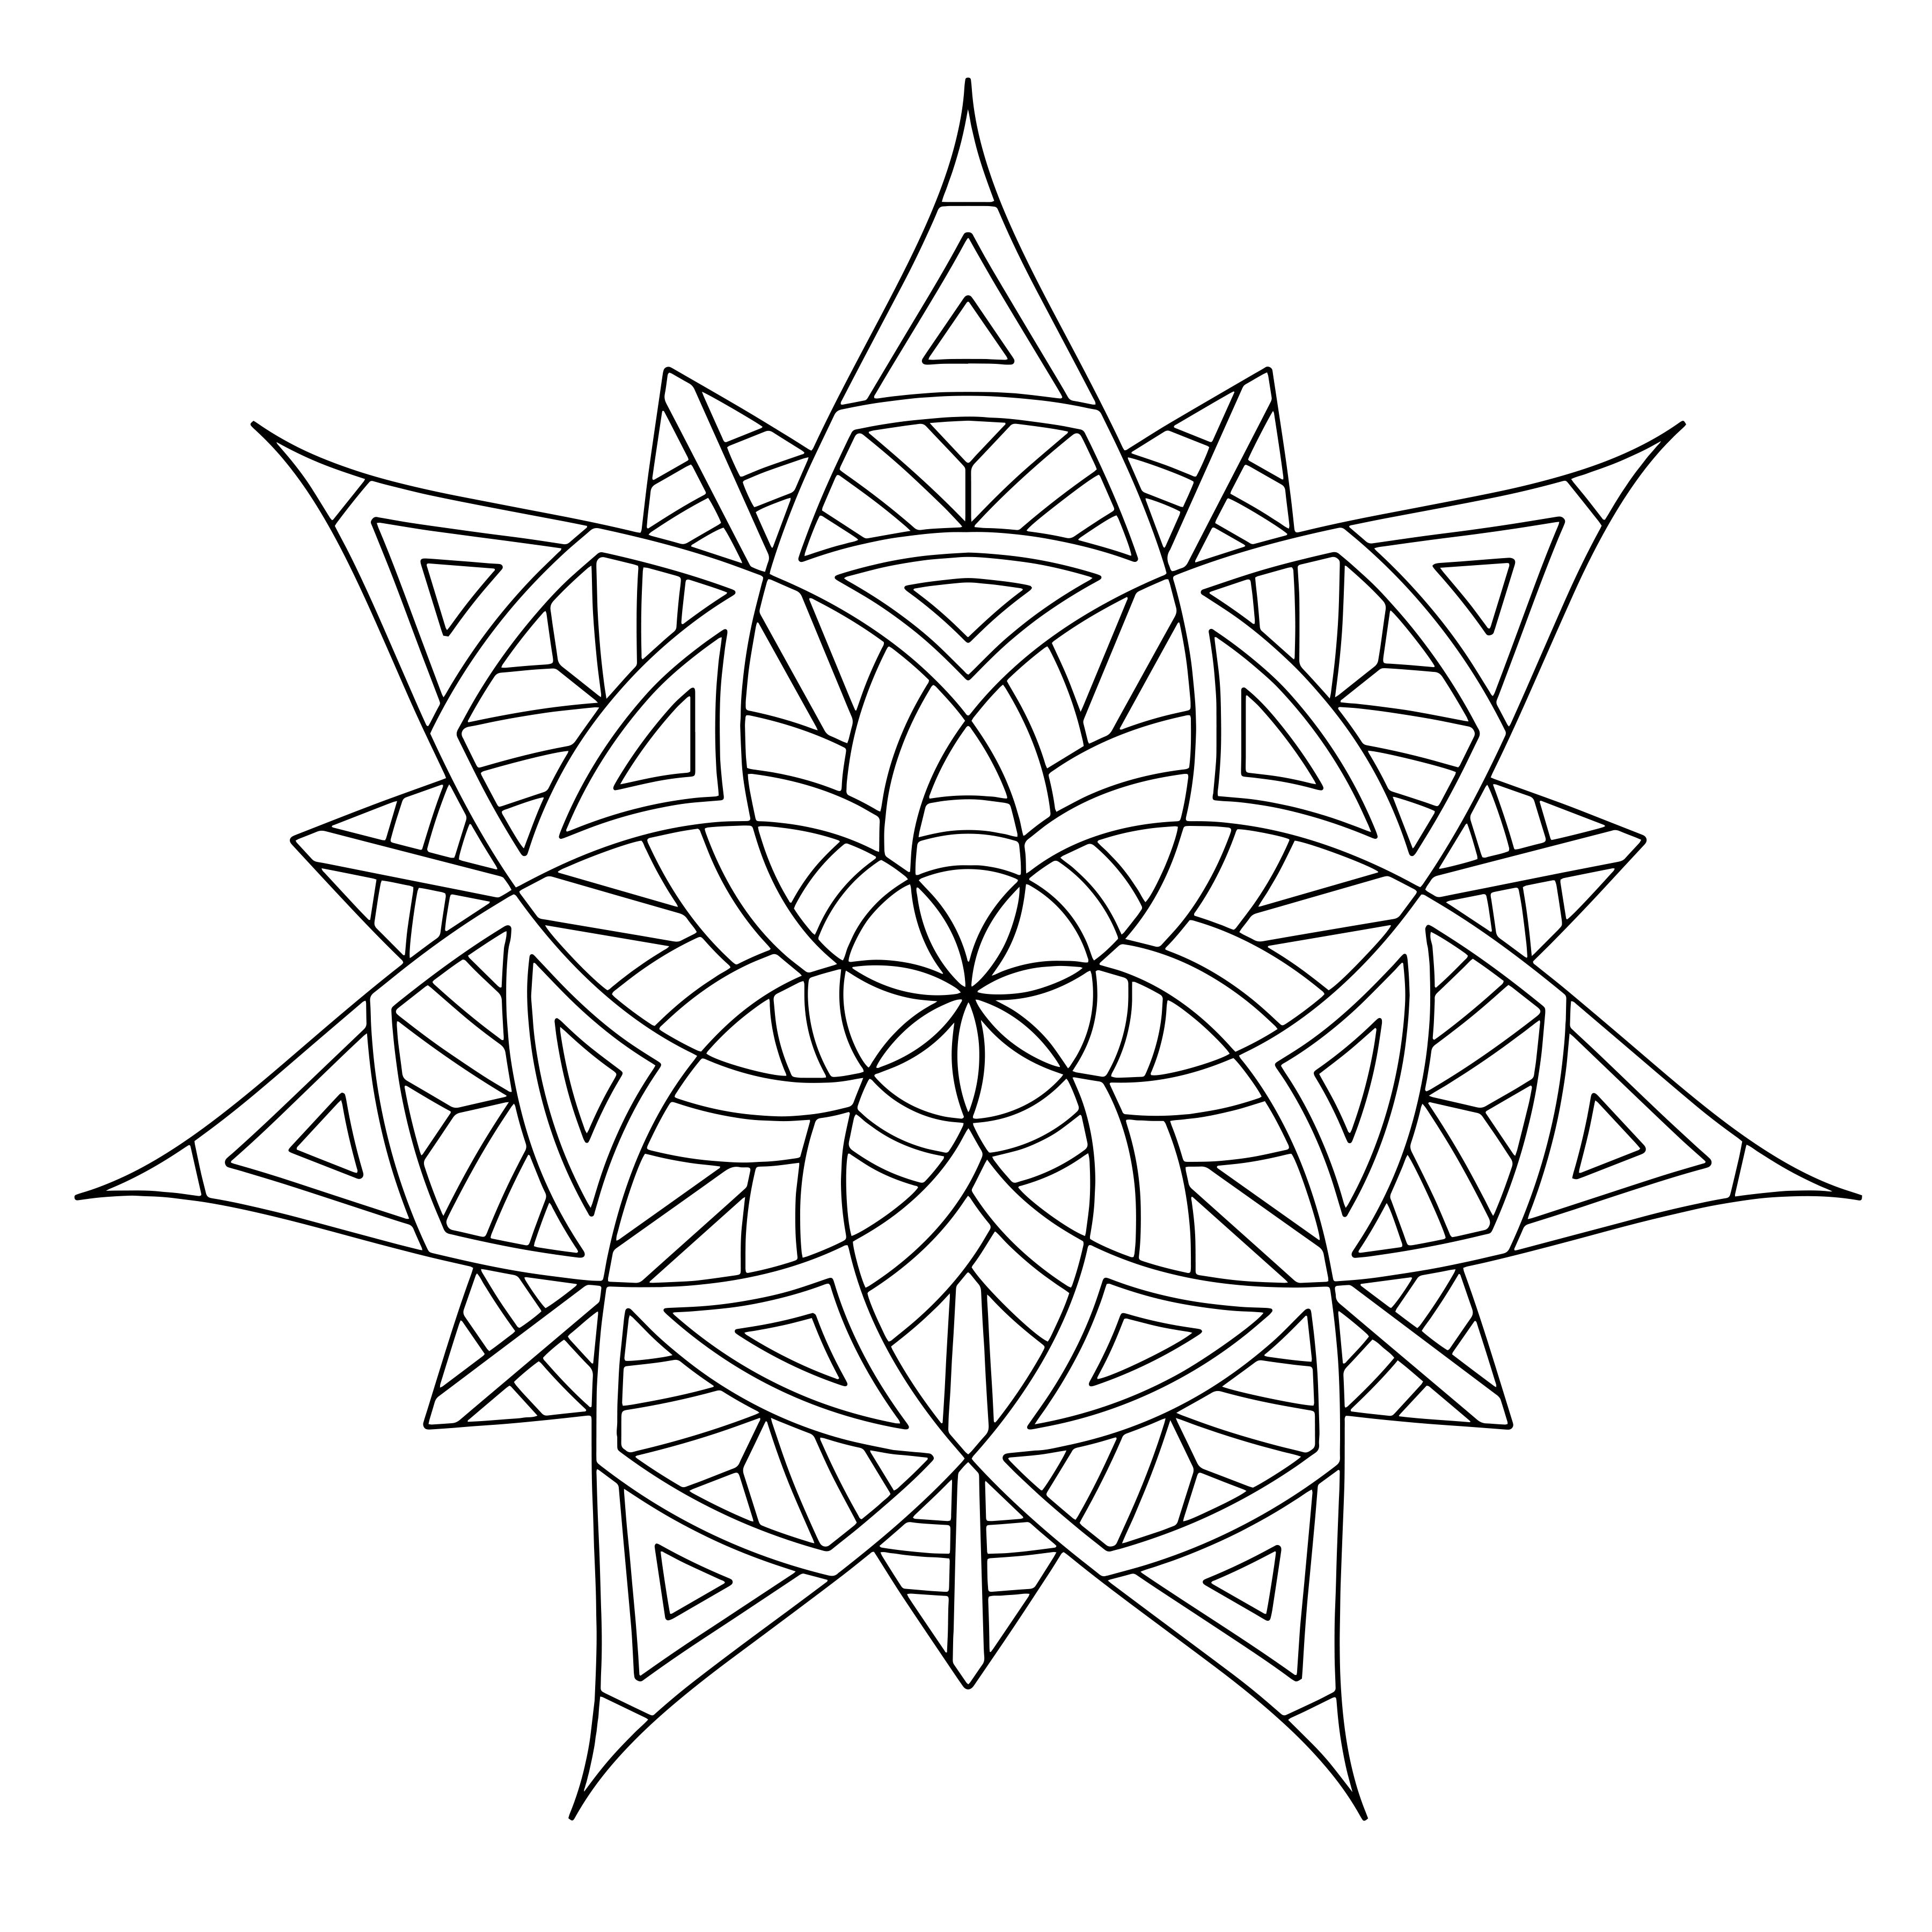 Free Pdf Coloring Pages For Adults
 Free Printable Geometric Coloring Pages for Adults